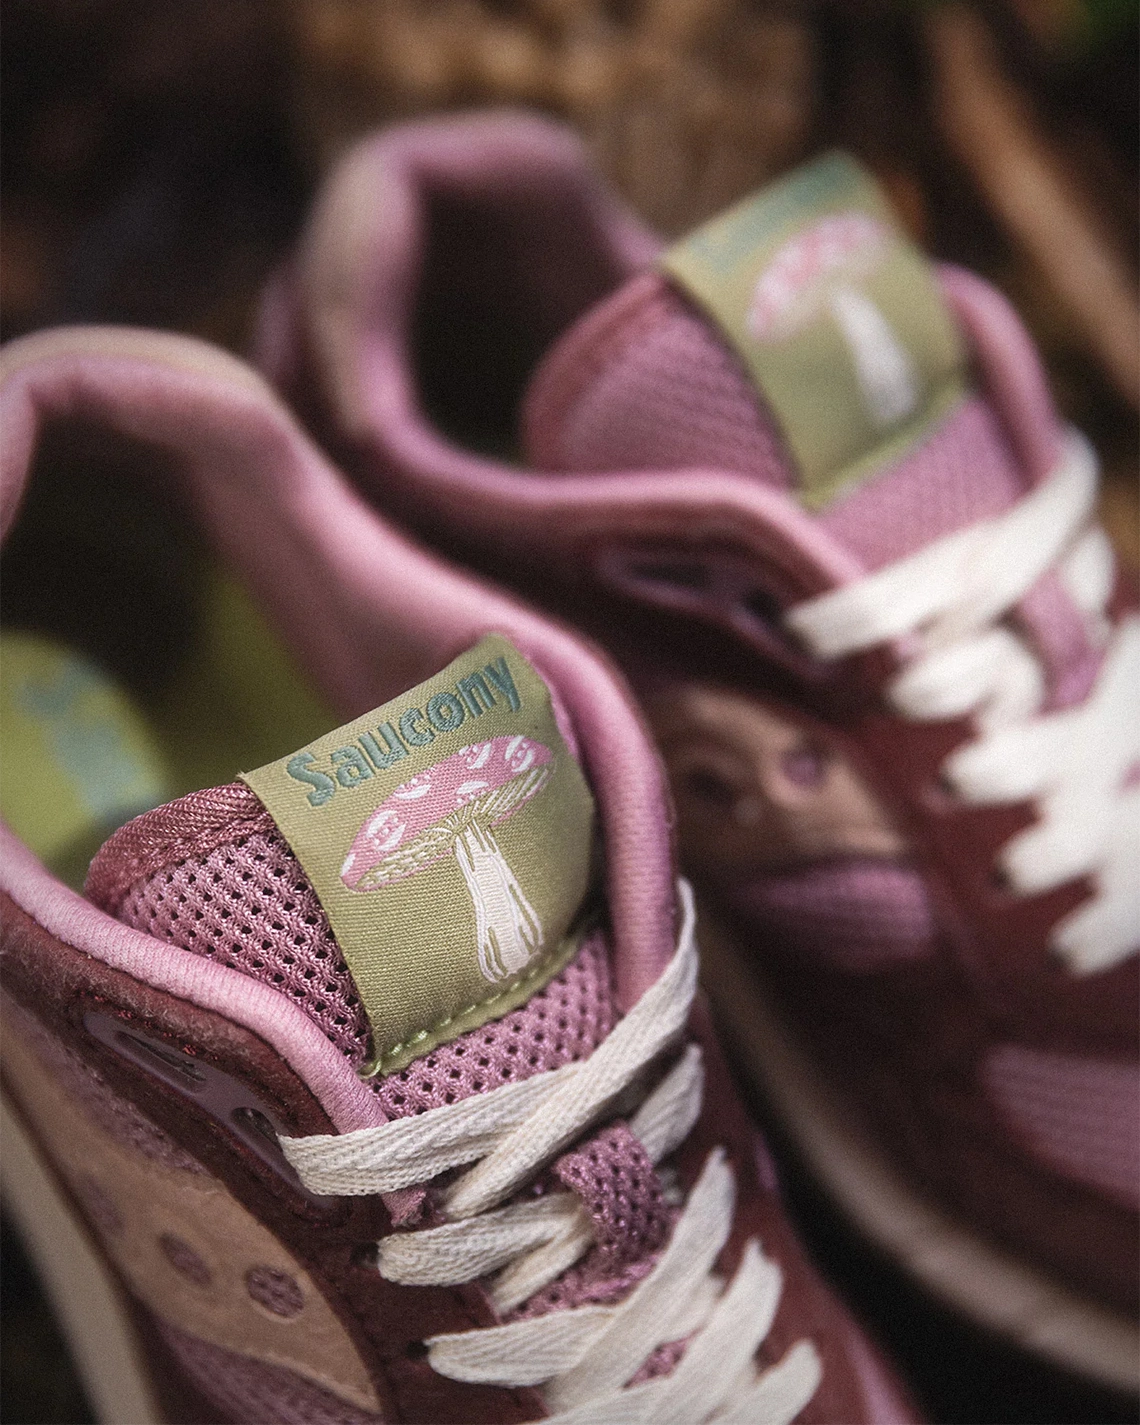 Saucony Celebrates Earth Day with Mushroom-Based Formula Footwear Lineup